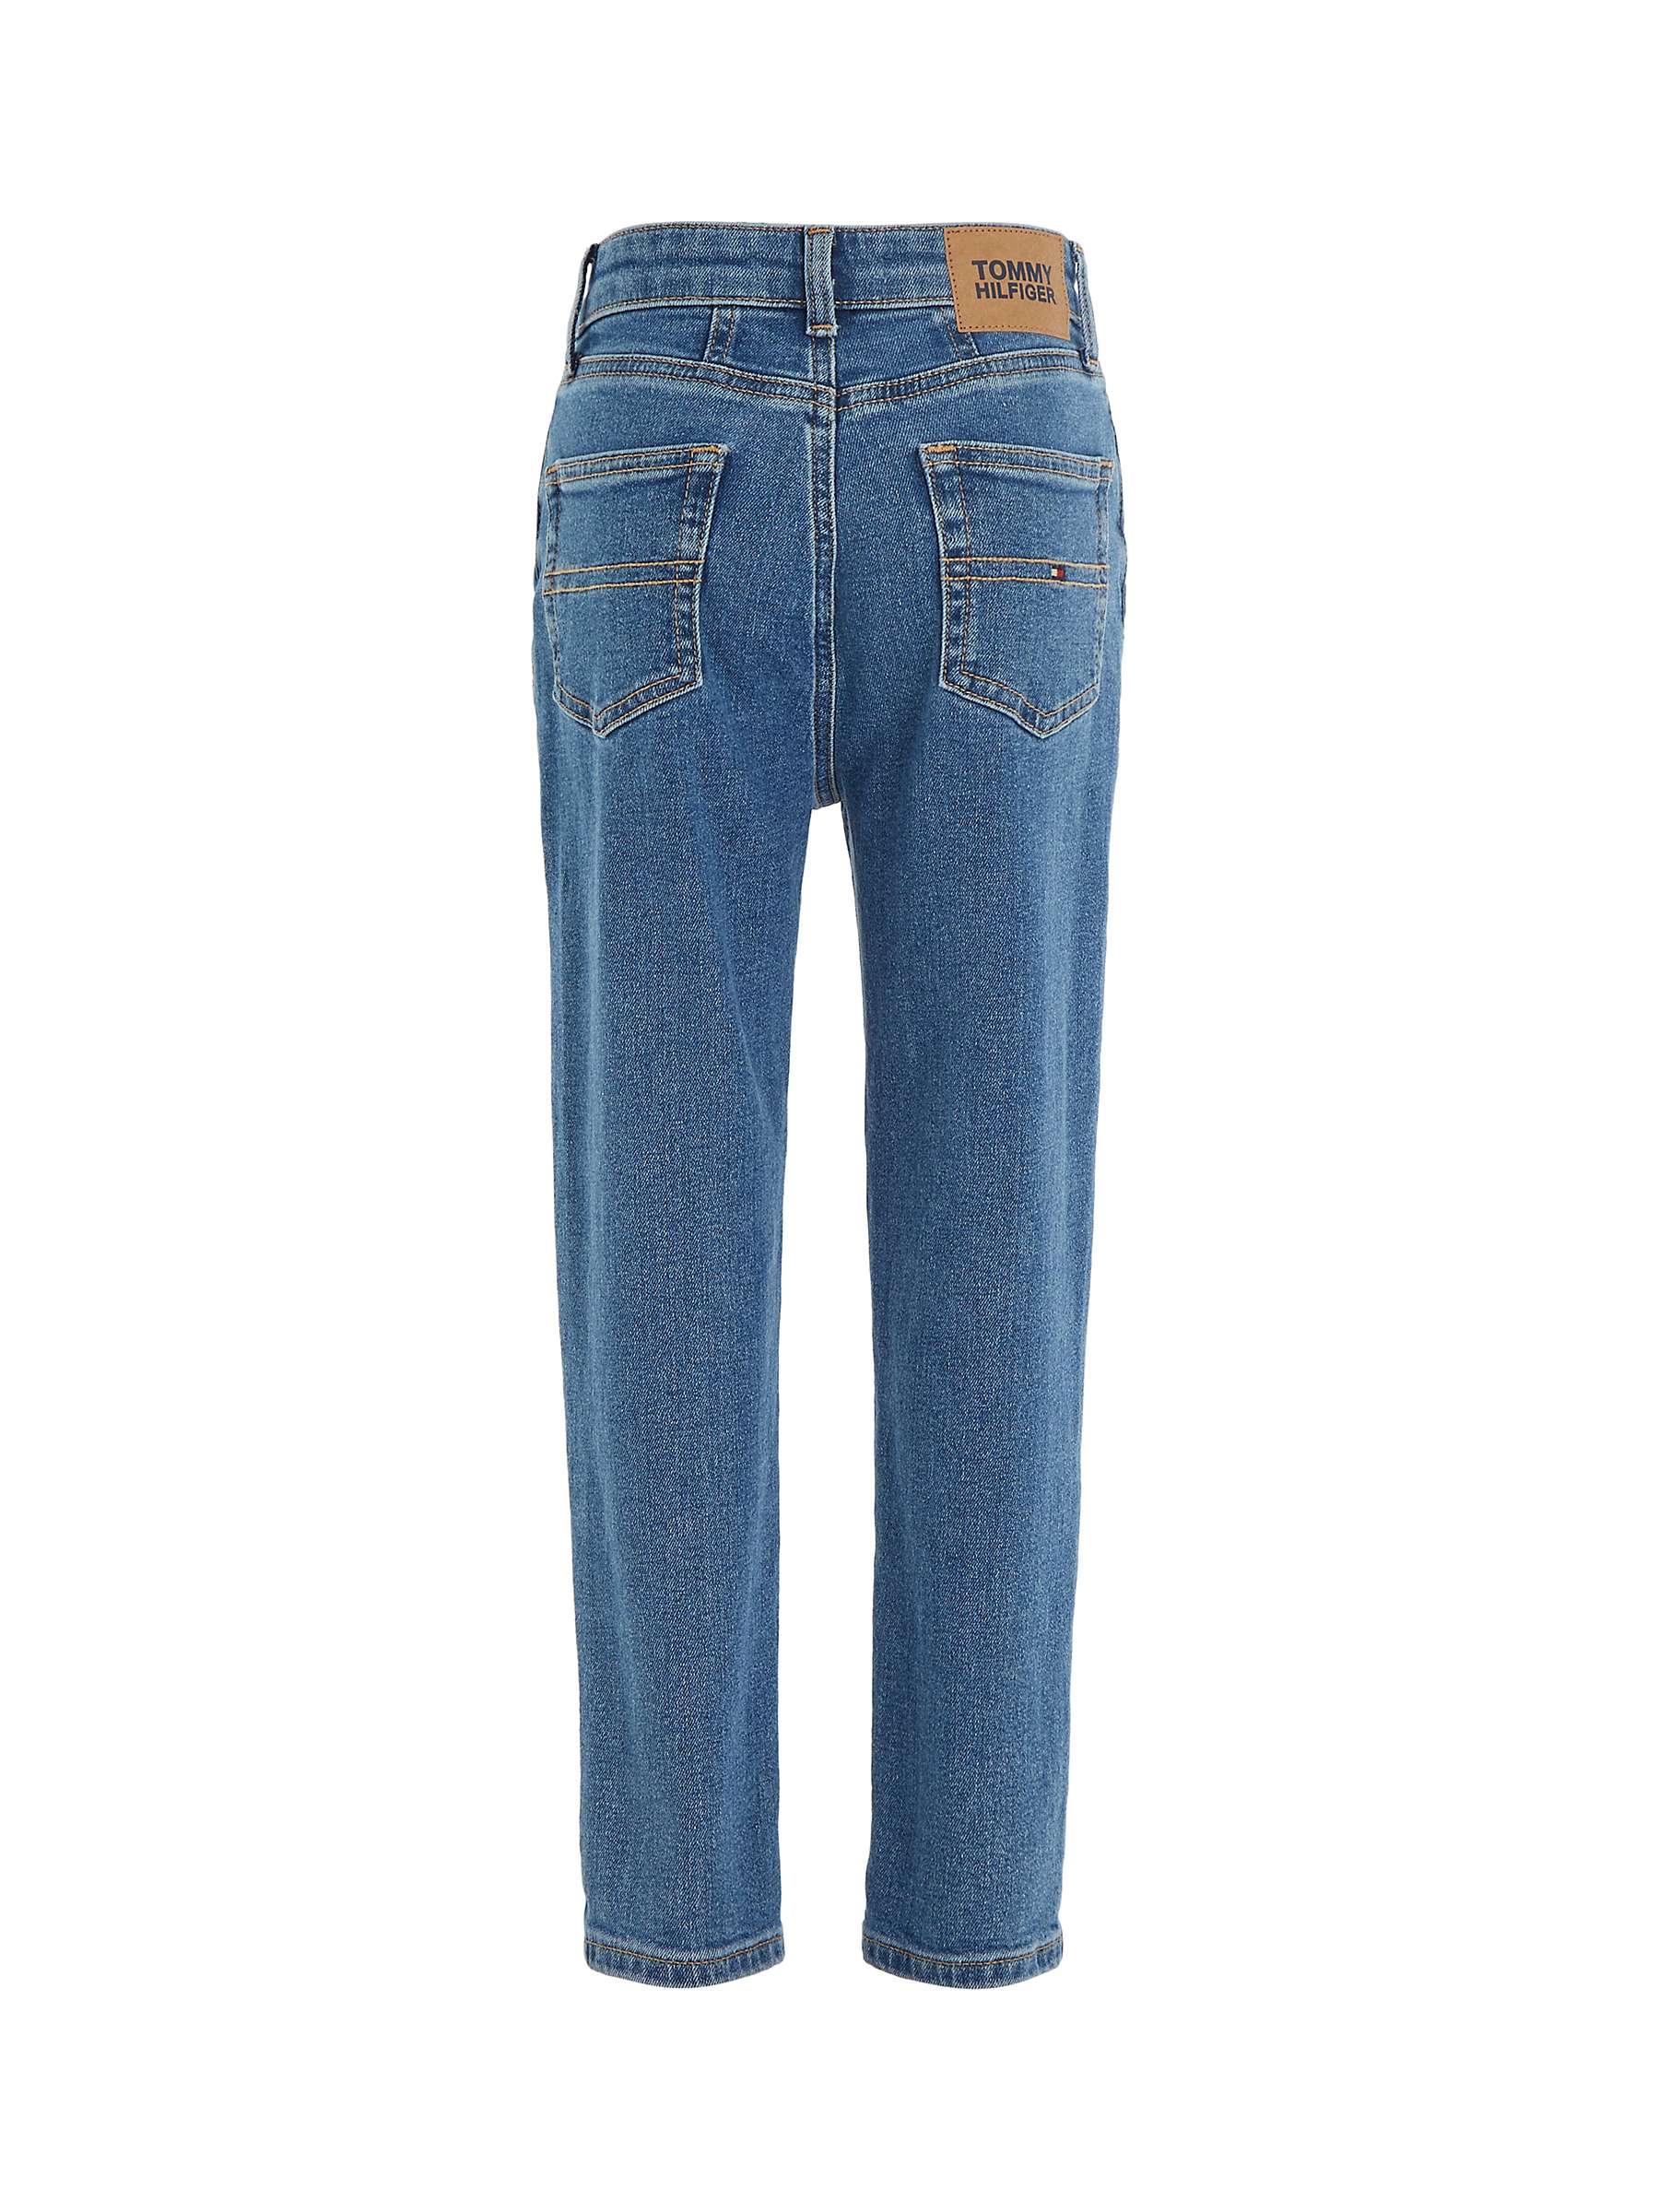 Tommy Hilfiger Kids' High Rise Tapered Jeans, Midused at John Lewis ...